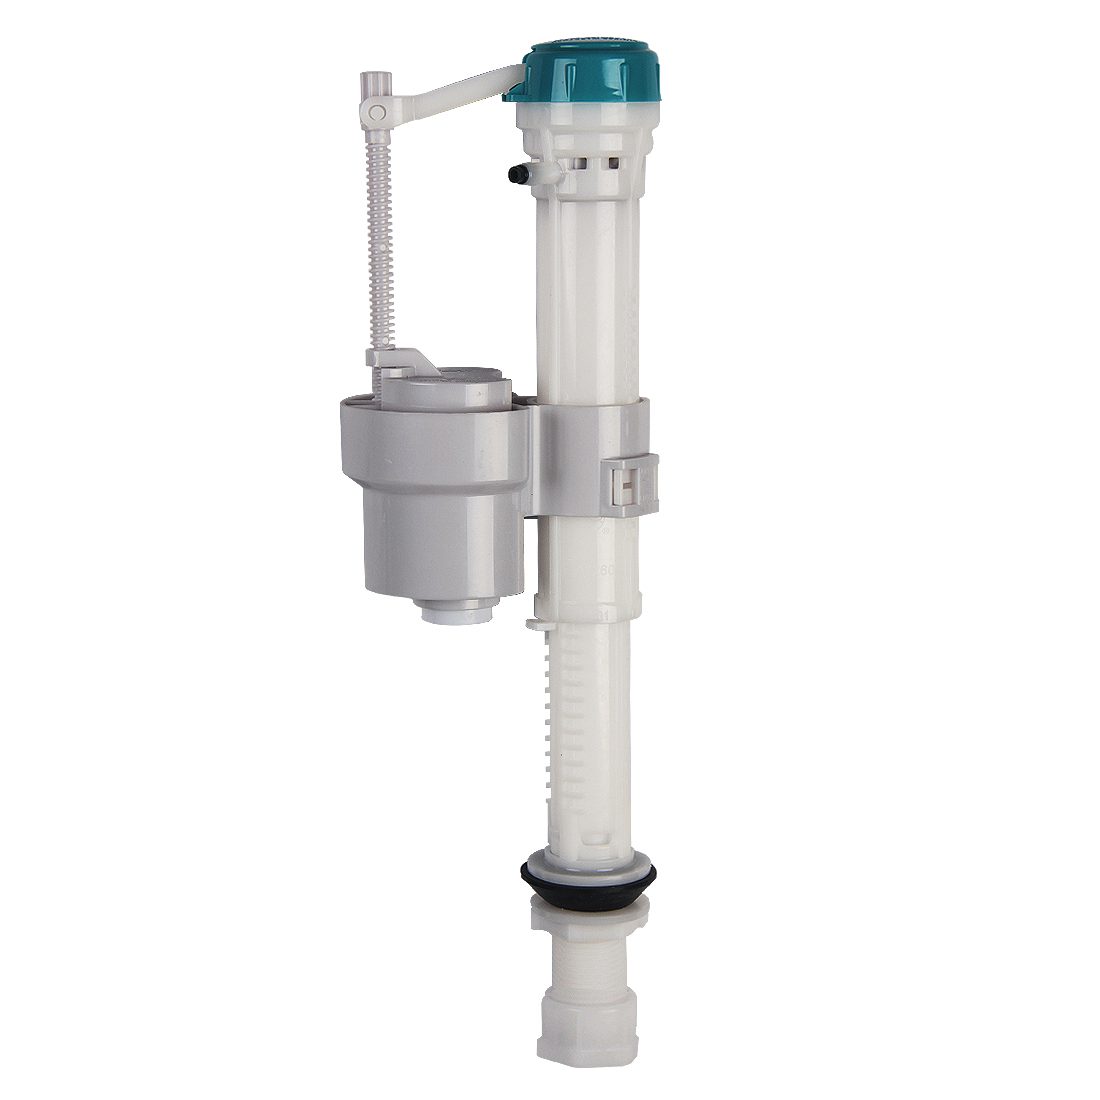 Auckland Toilet 15inch Dual Fill Valve View